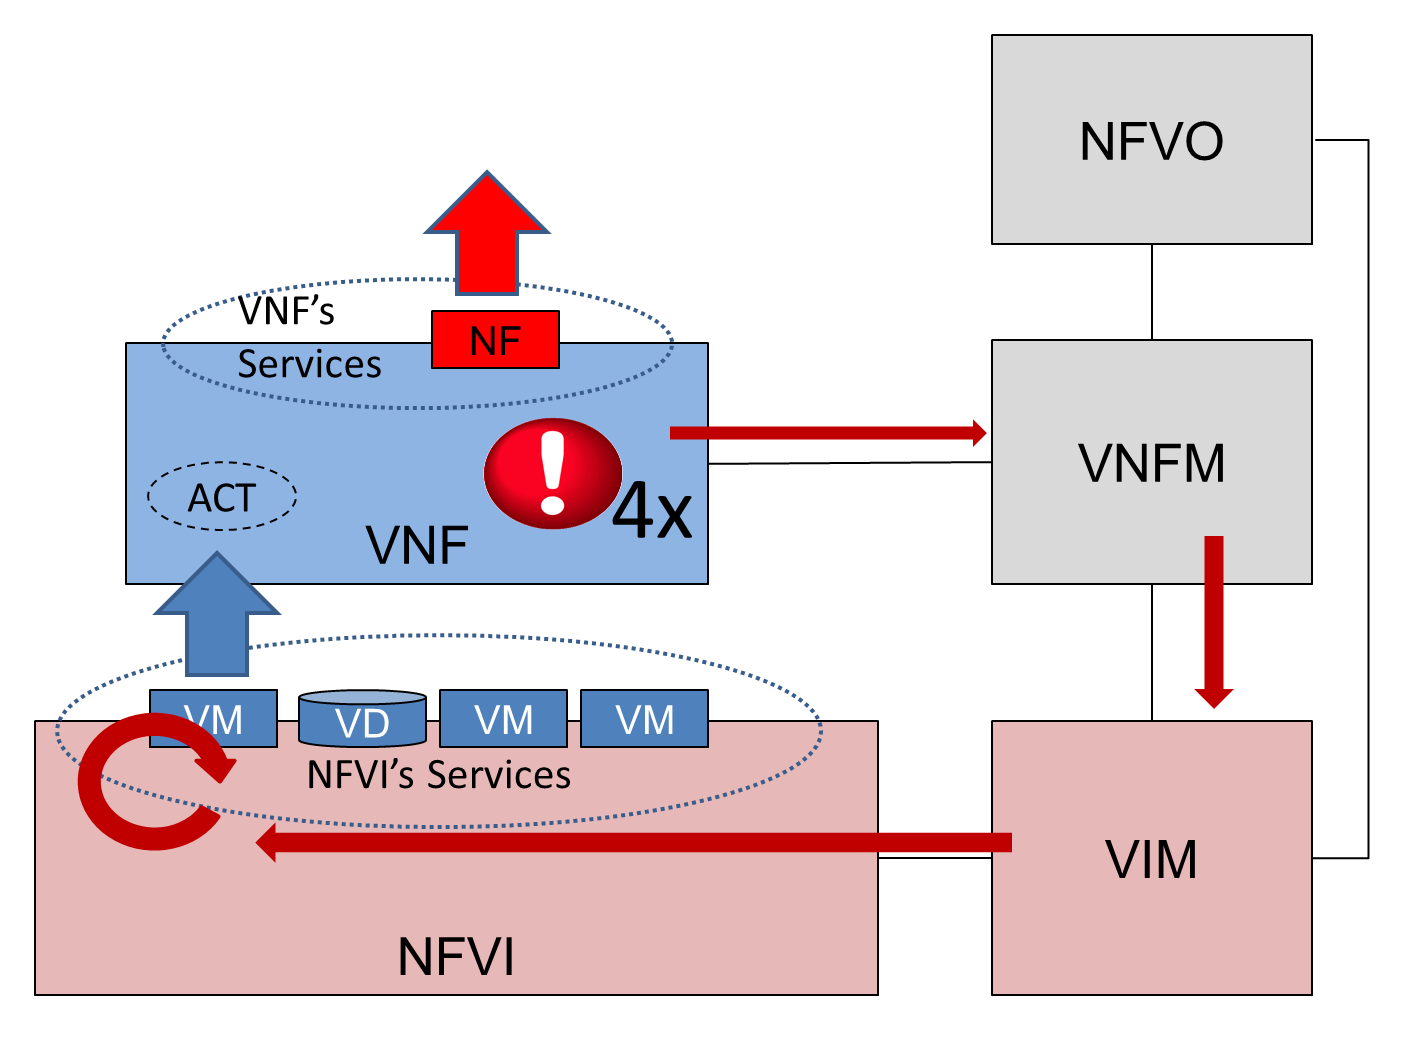 Escalation of repeated VNFC failure in a stateless VNF with no redundancy